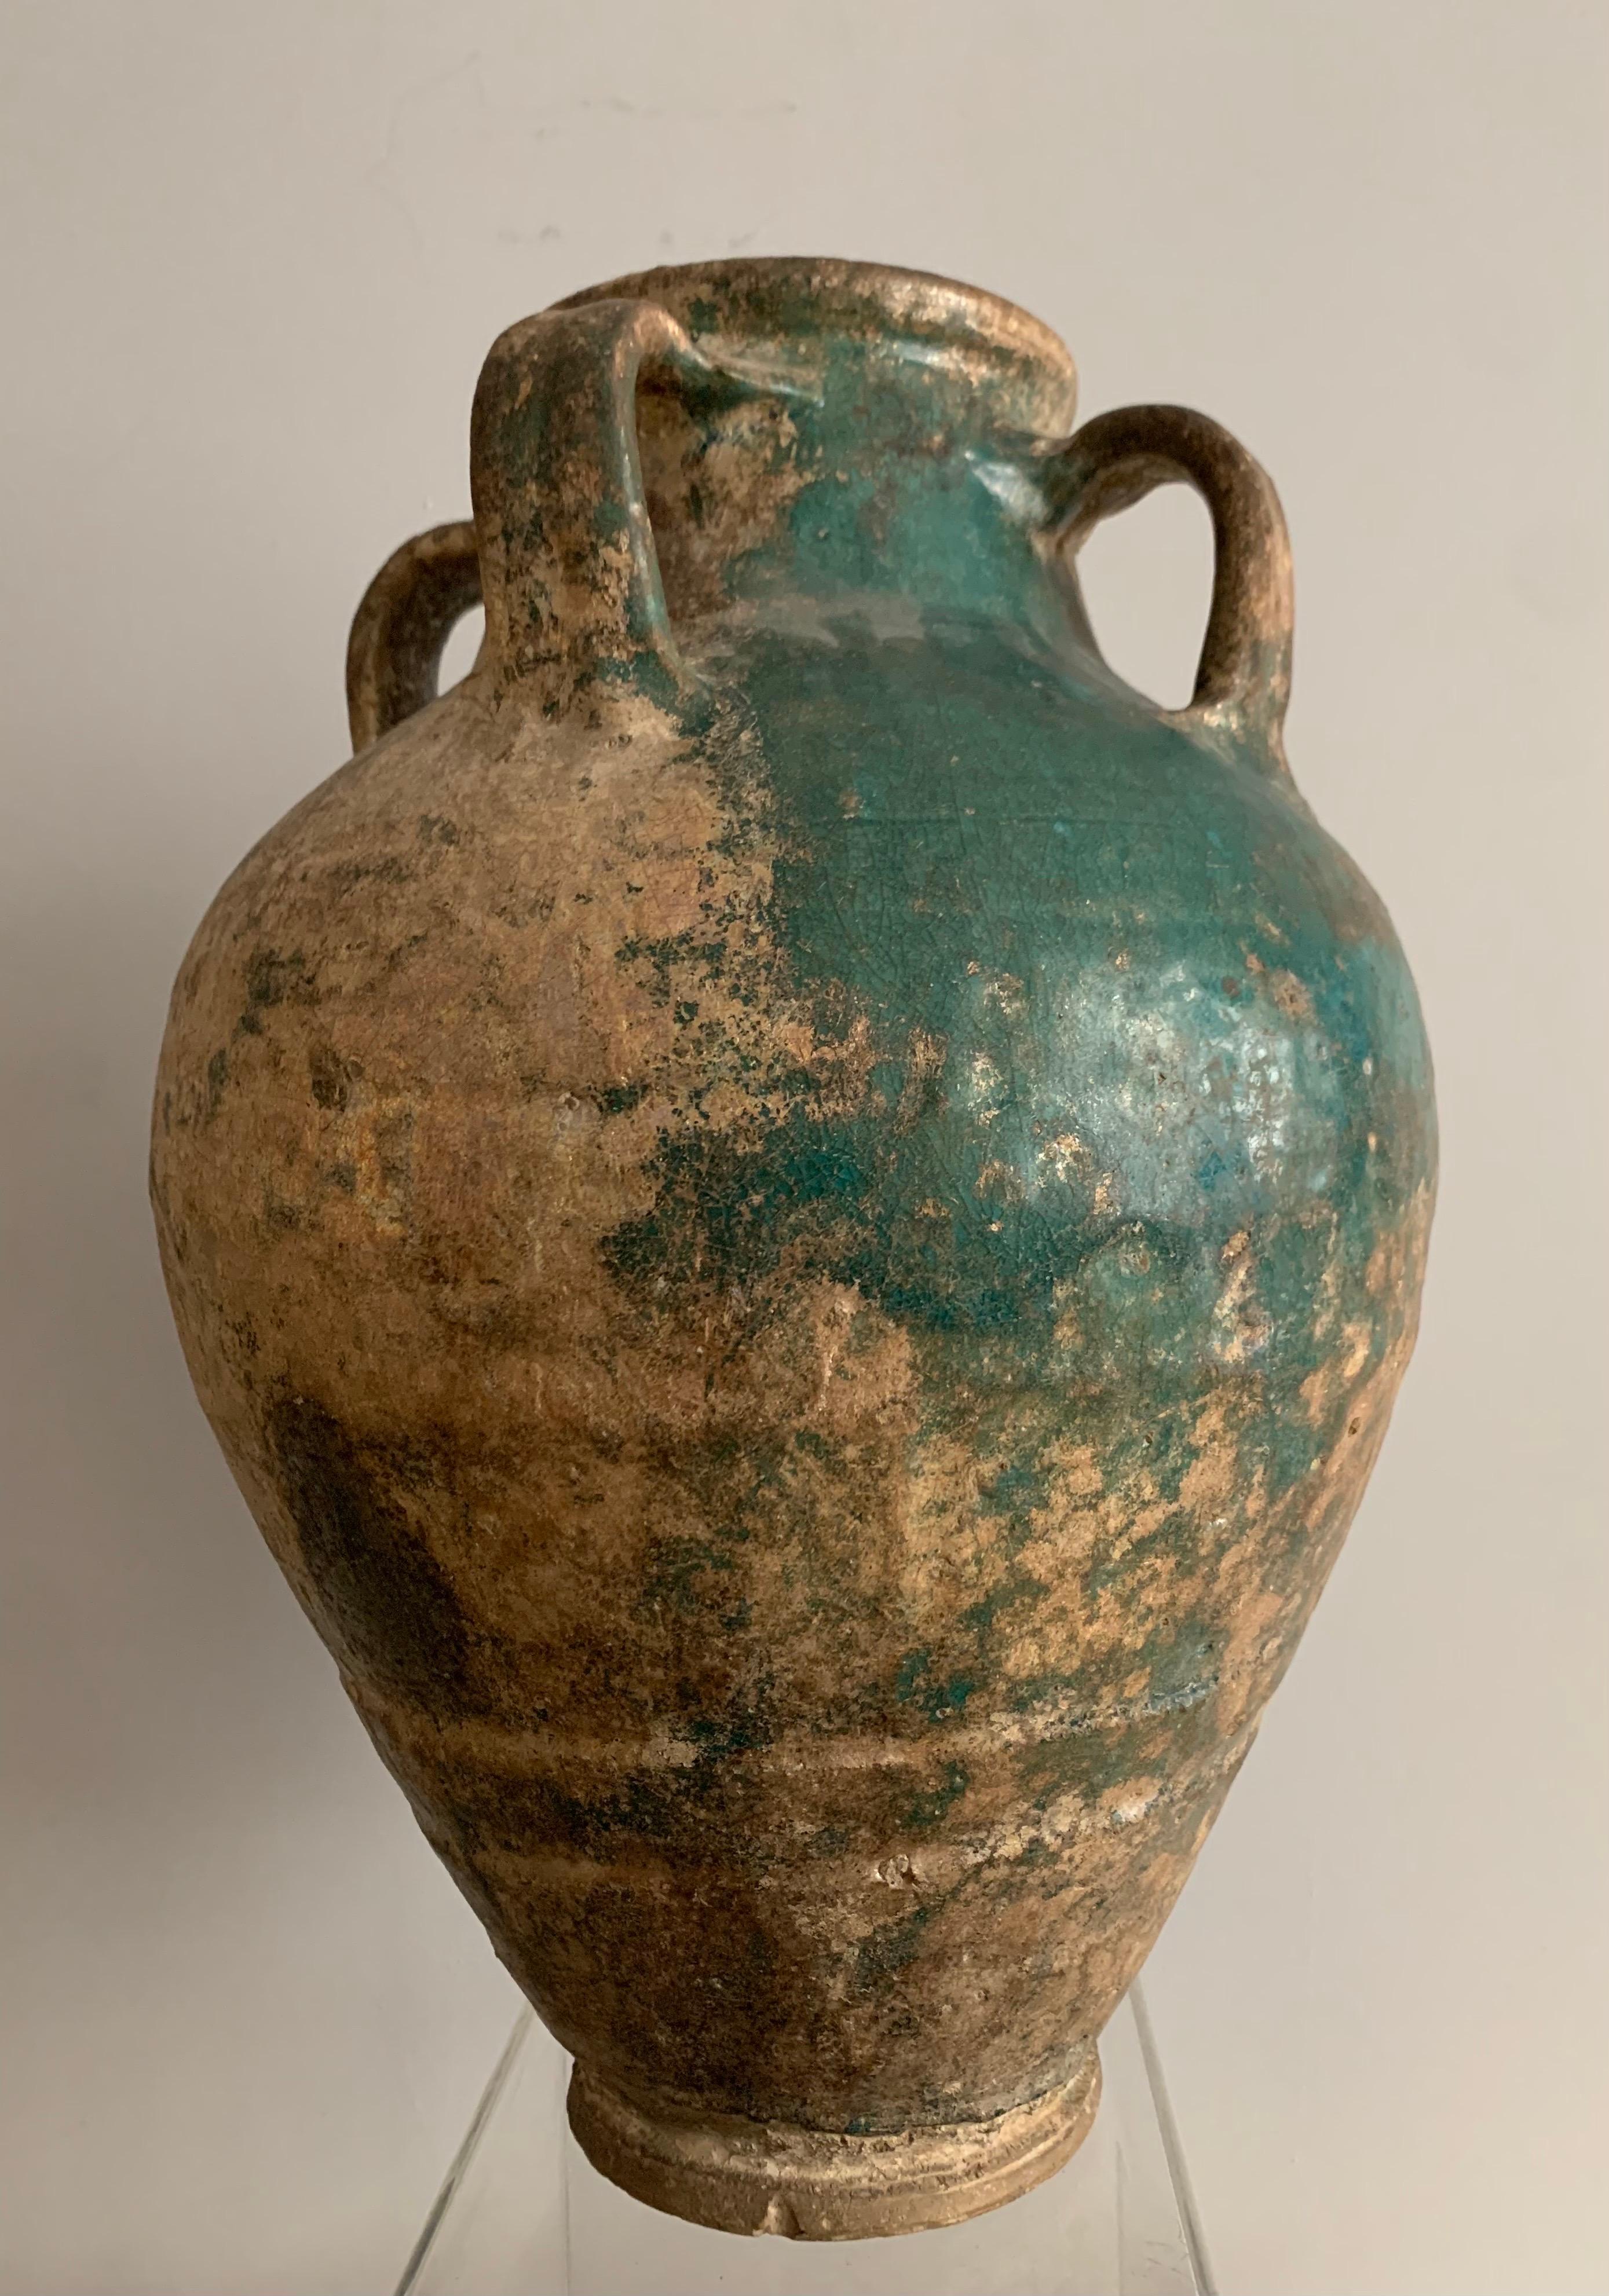 Four handle jar
Turquoise glazed earthenware storage jars of this type are an ancient form in the Gulf region. 
Technical studies have now established that this jar type was produced at and around Basra, the early medieval port city serving Baghdad.